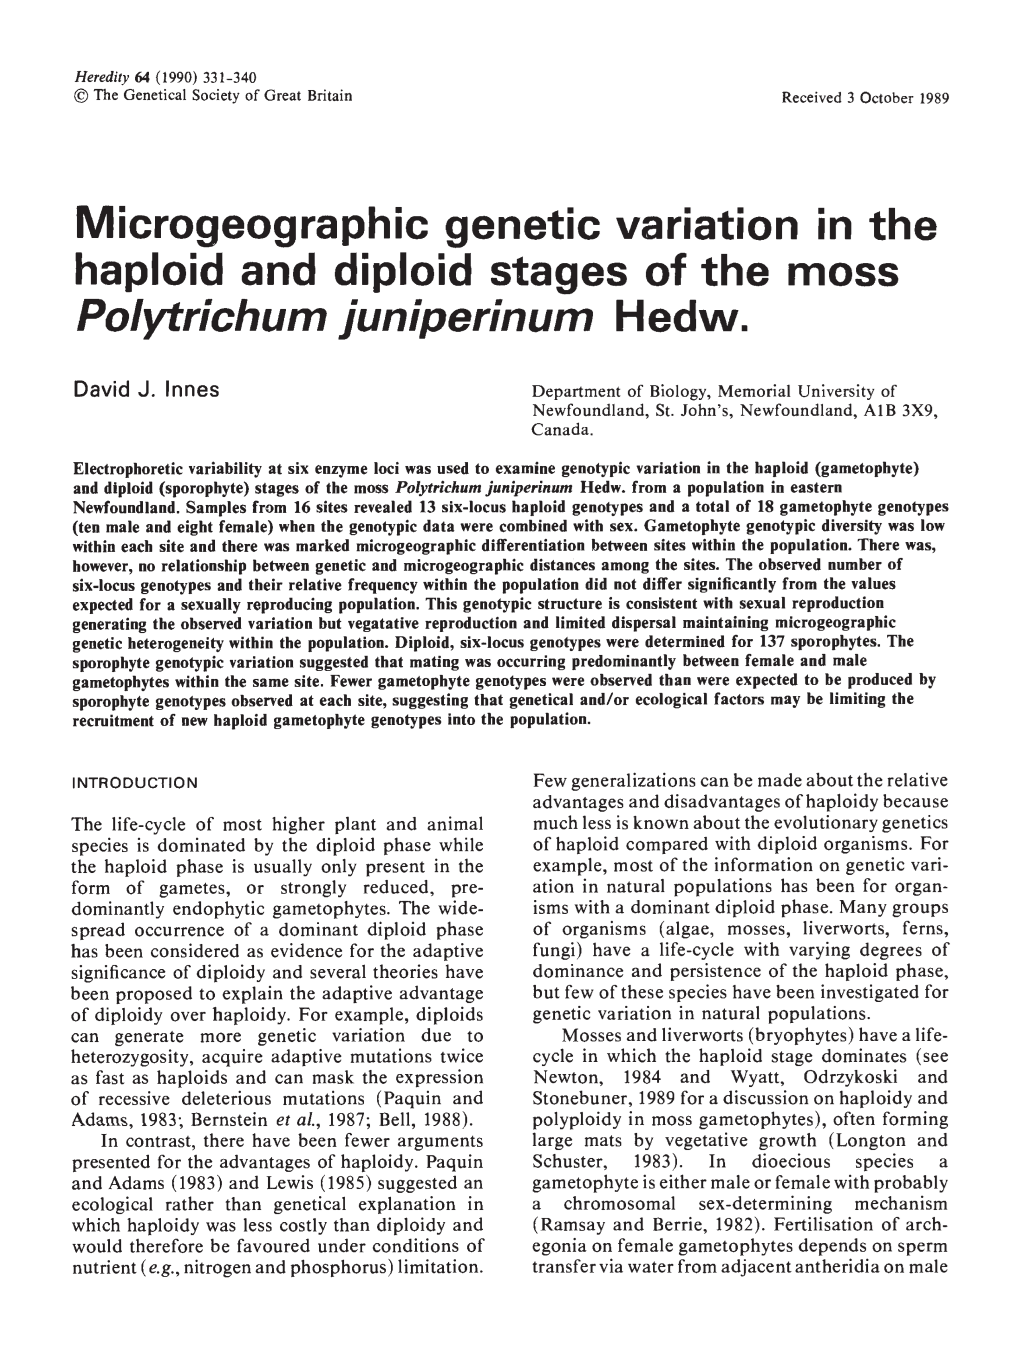 Microgeographic Genetic Variation in the Haploid and Diploid Stages of the Moss Polytrichum Juniperinum H Edw